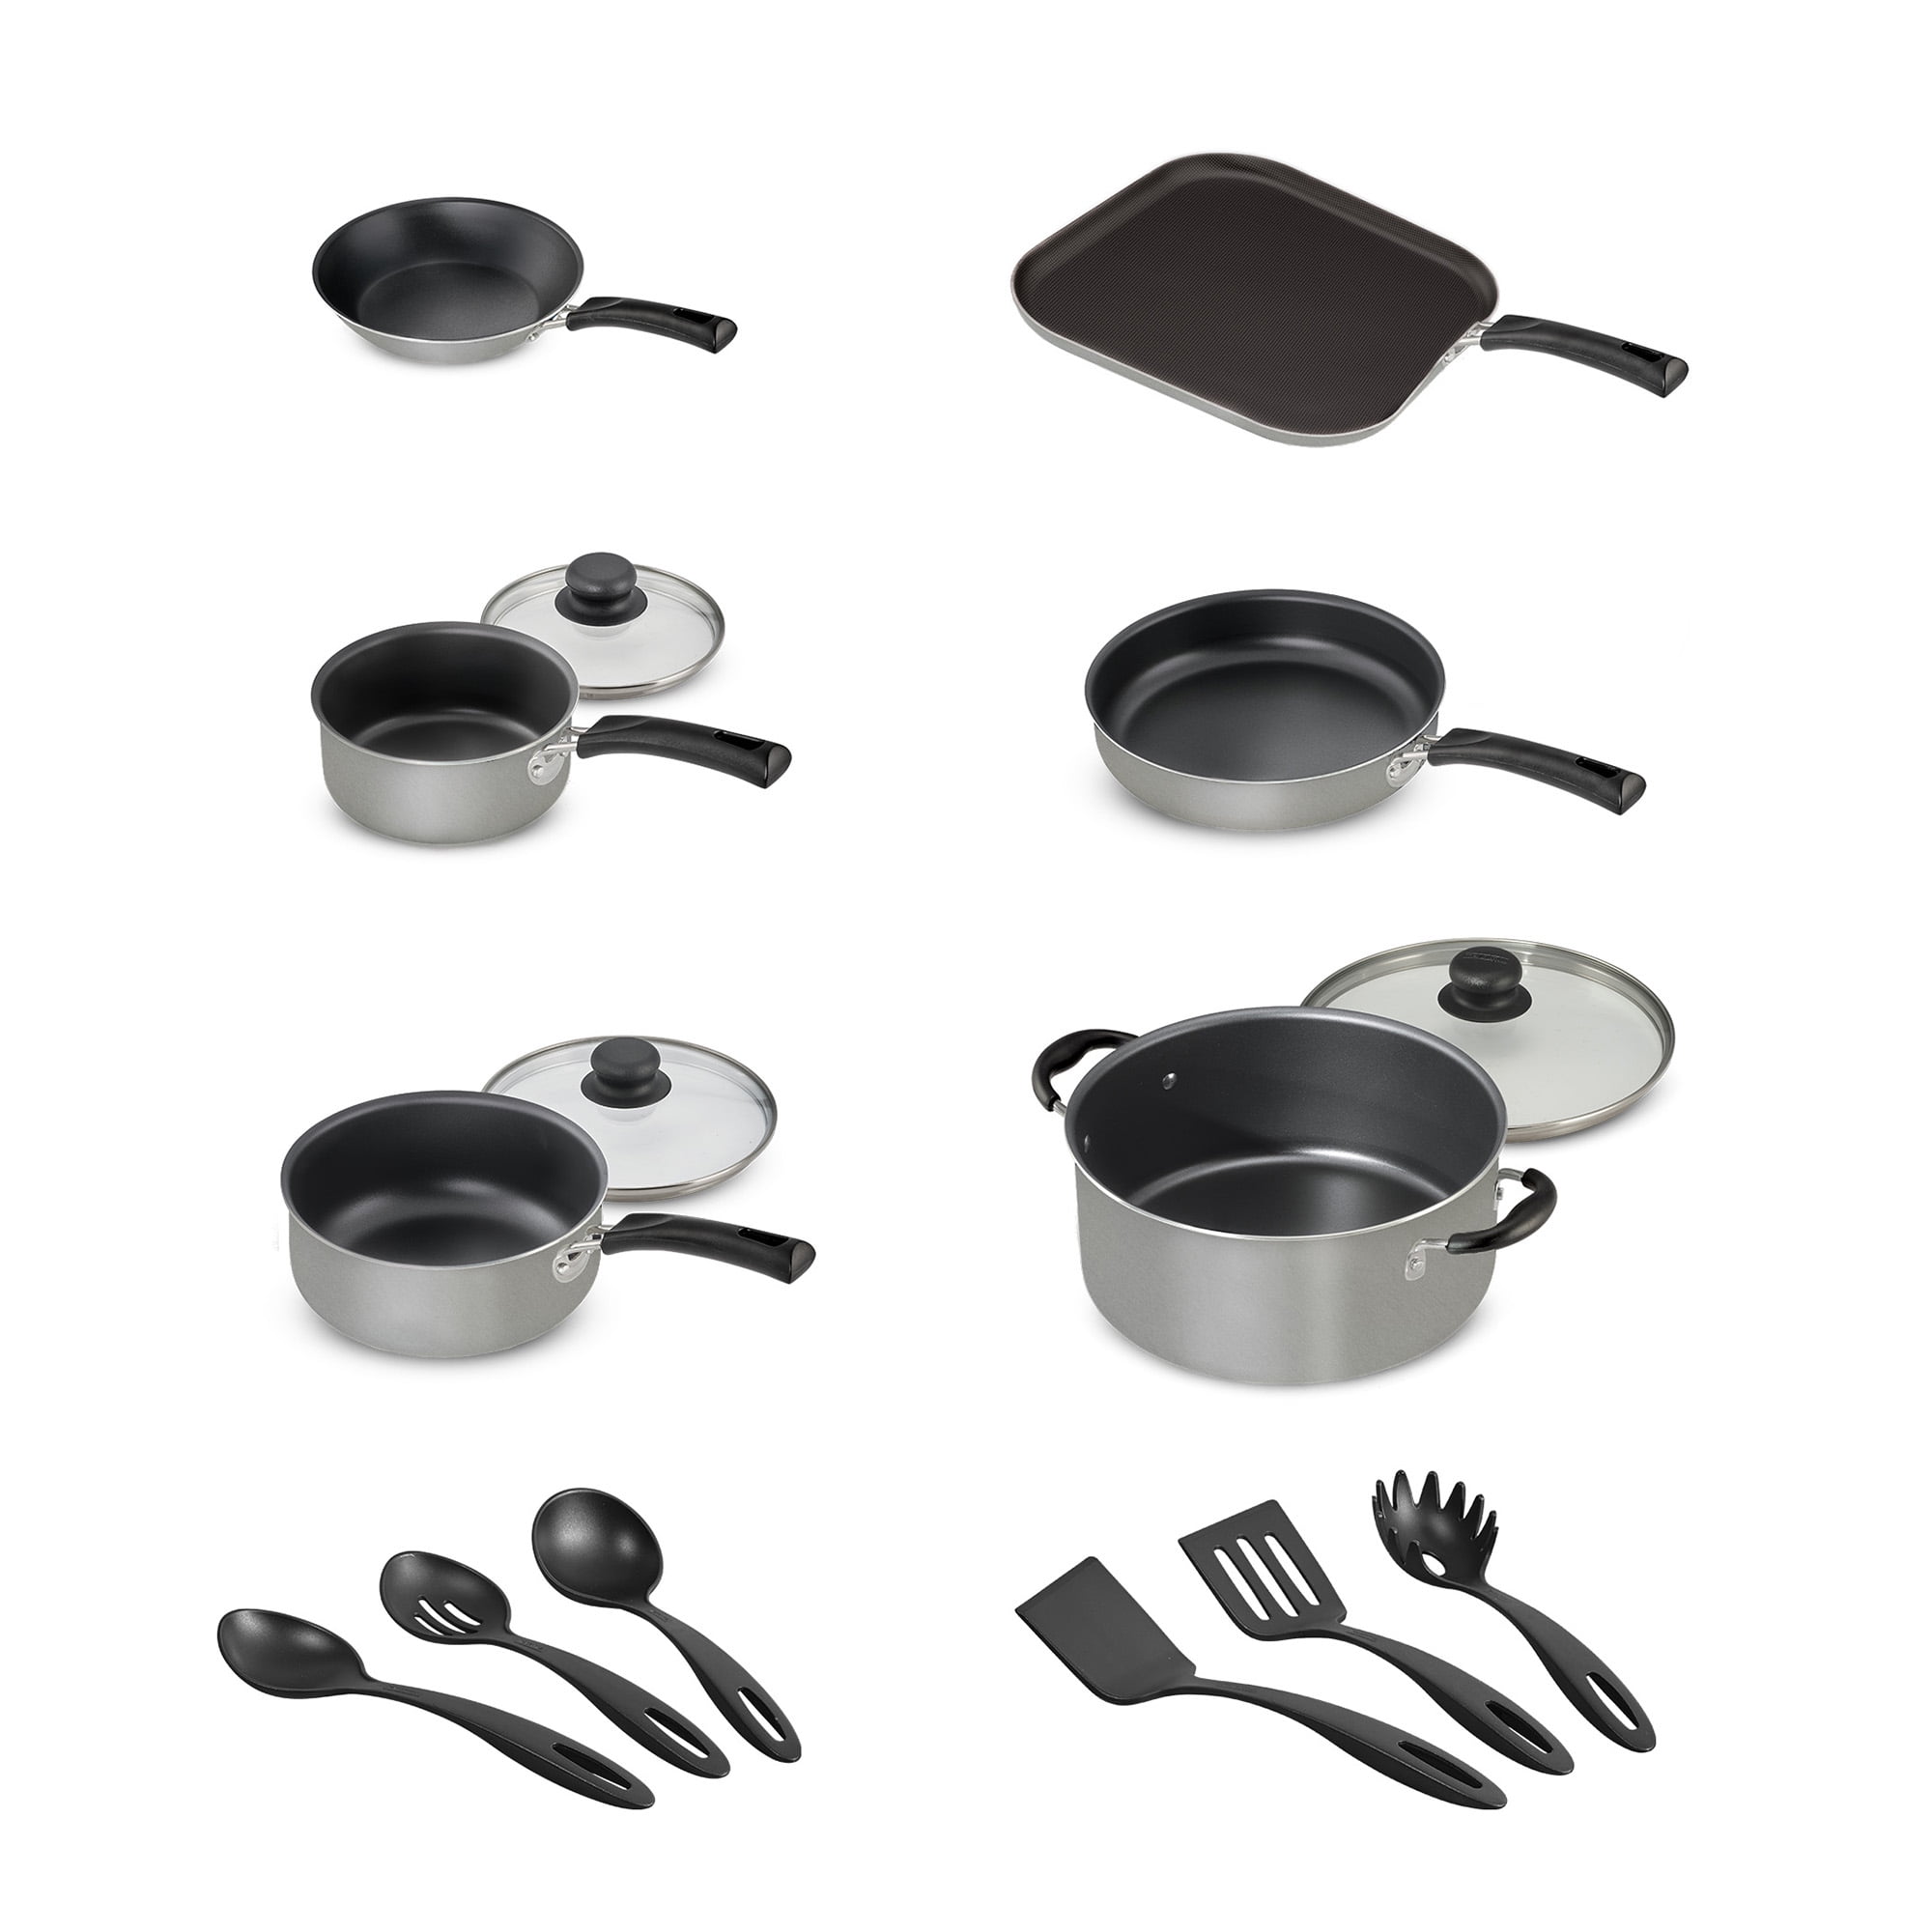  Tramontina Primaware 15 pc Nonstick Cookware Set - Storm,  80143/034DS: Home & Kitchen